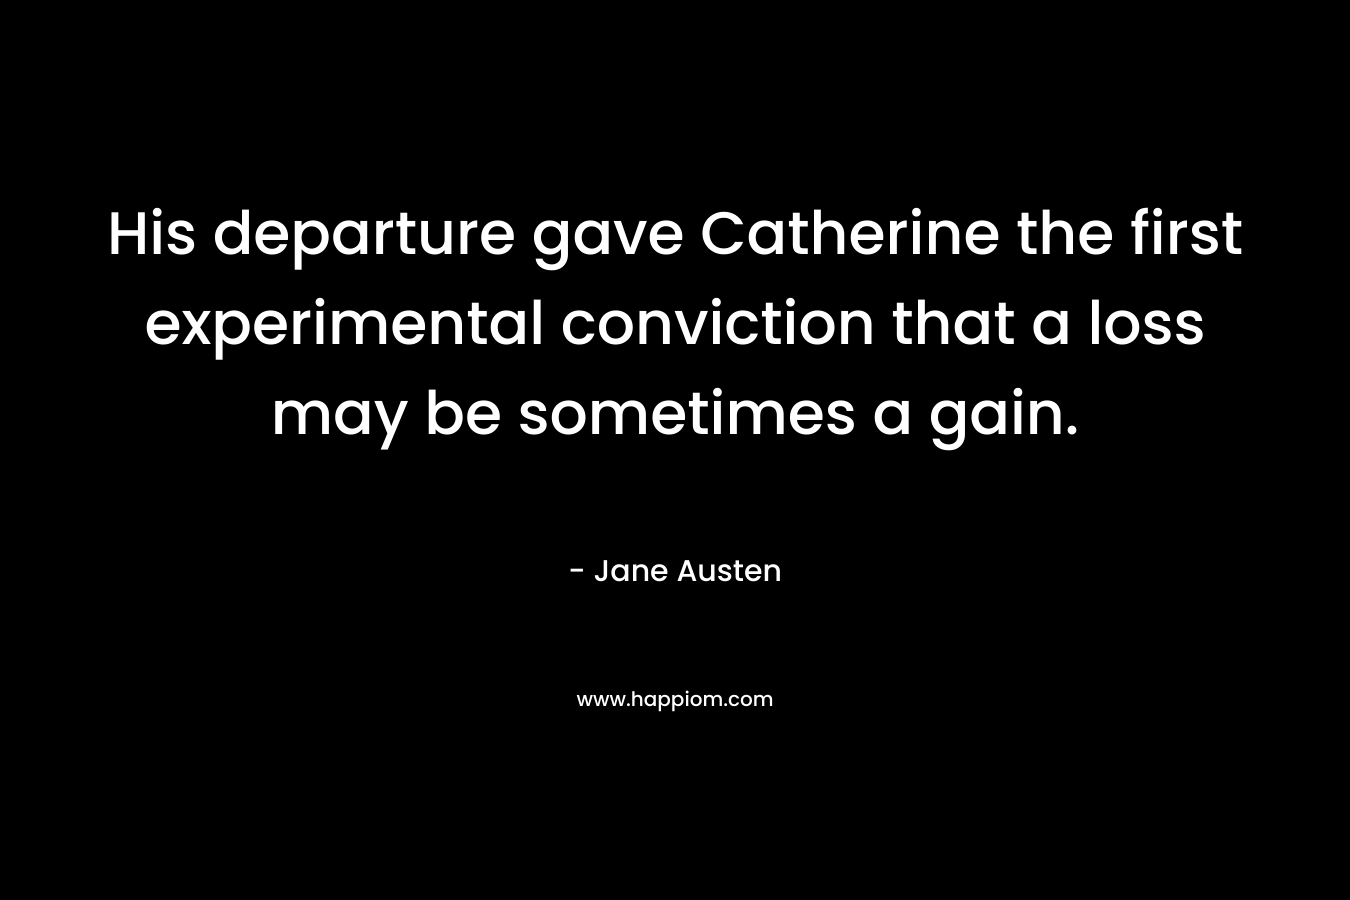 His departure gave Catherine the first experimental conviction that a loss may be sometimes a gain. – Jane Austen